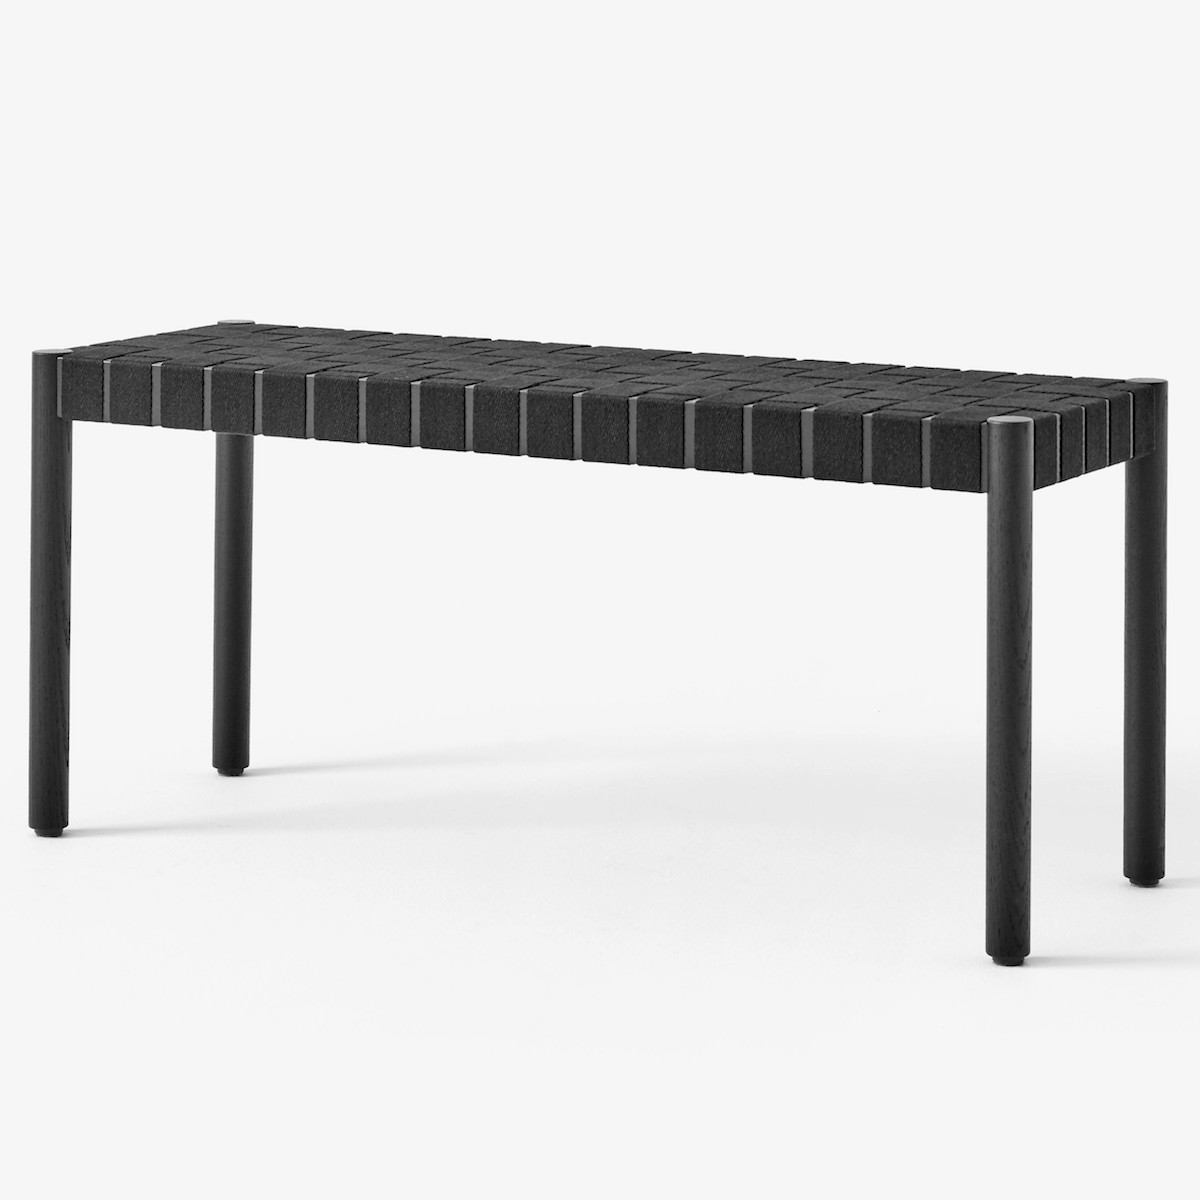 &Tradition Betty Bench 105x36xH46 cm - Black / Natural linen – OFFER